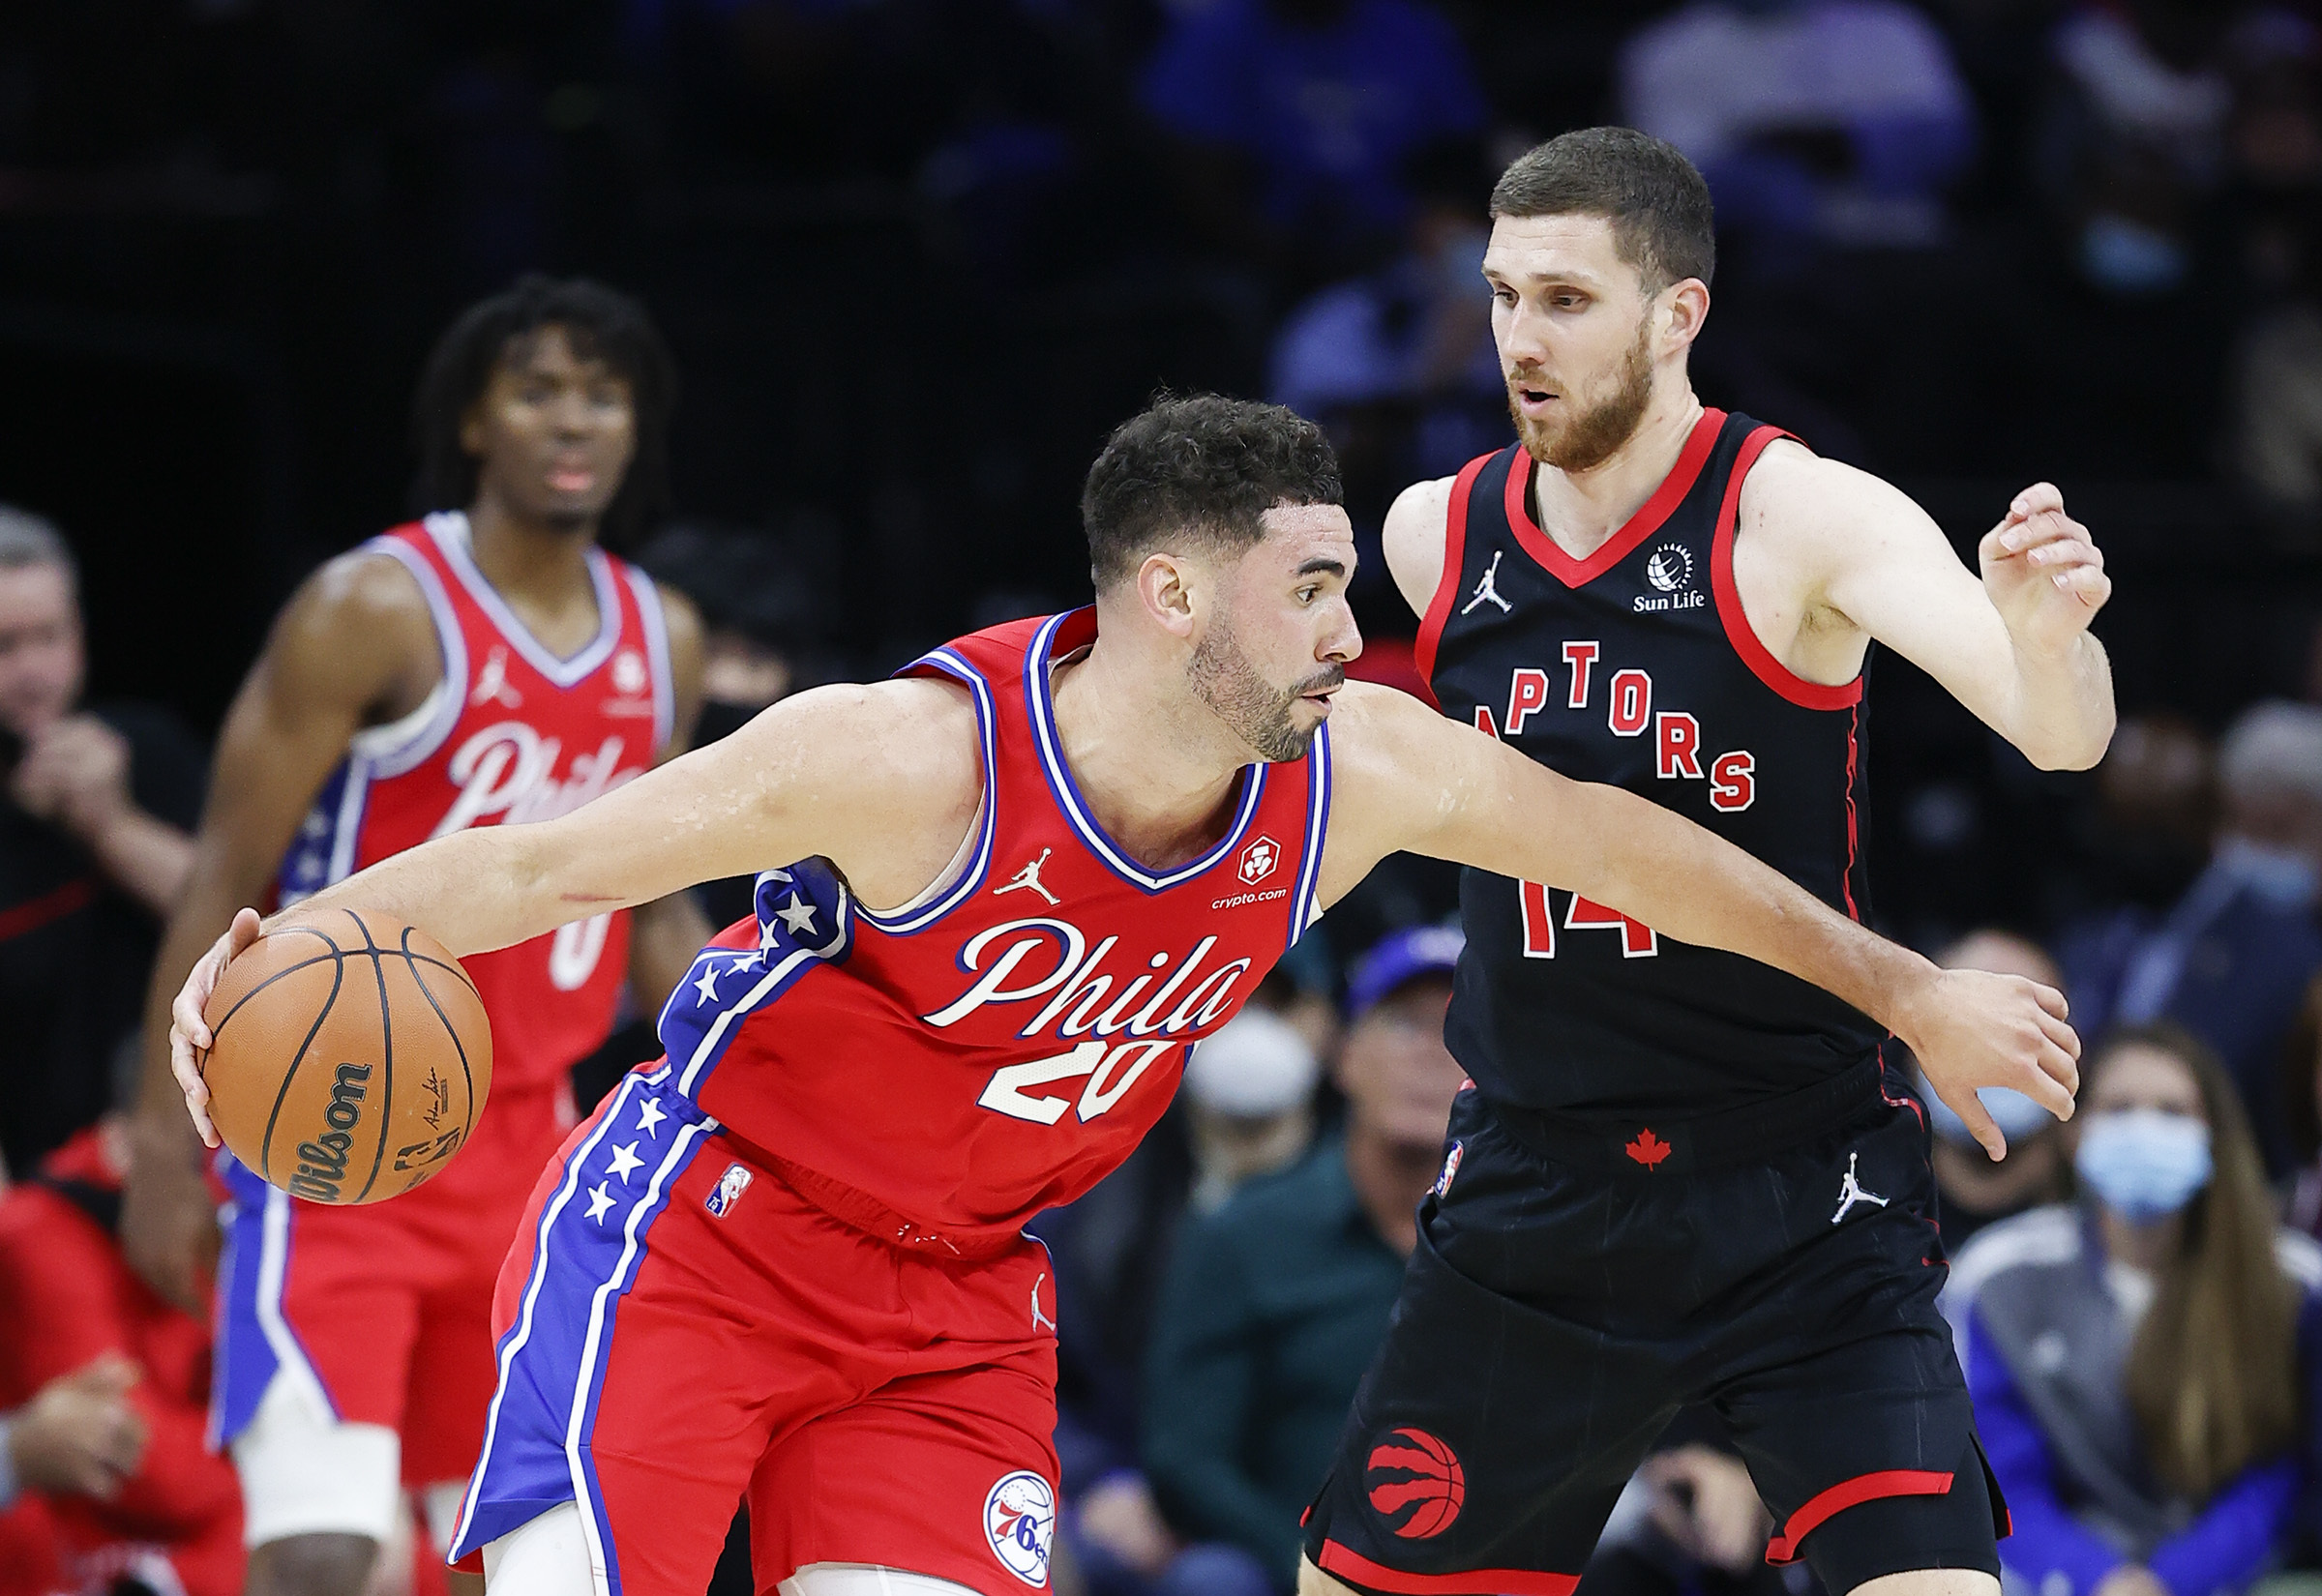 Sixers forward Georges Niang recounts his long journey to NBA success